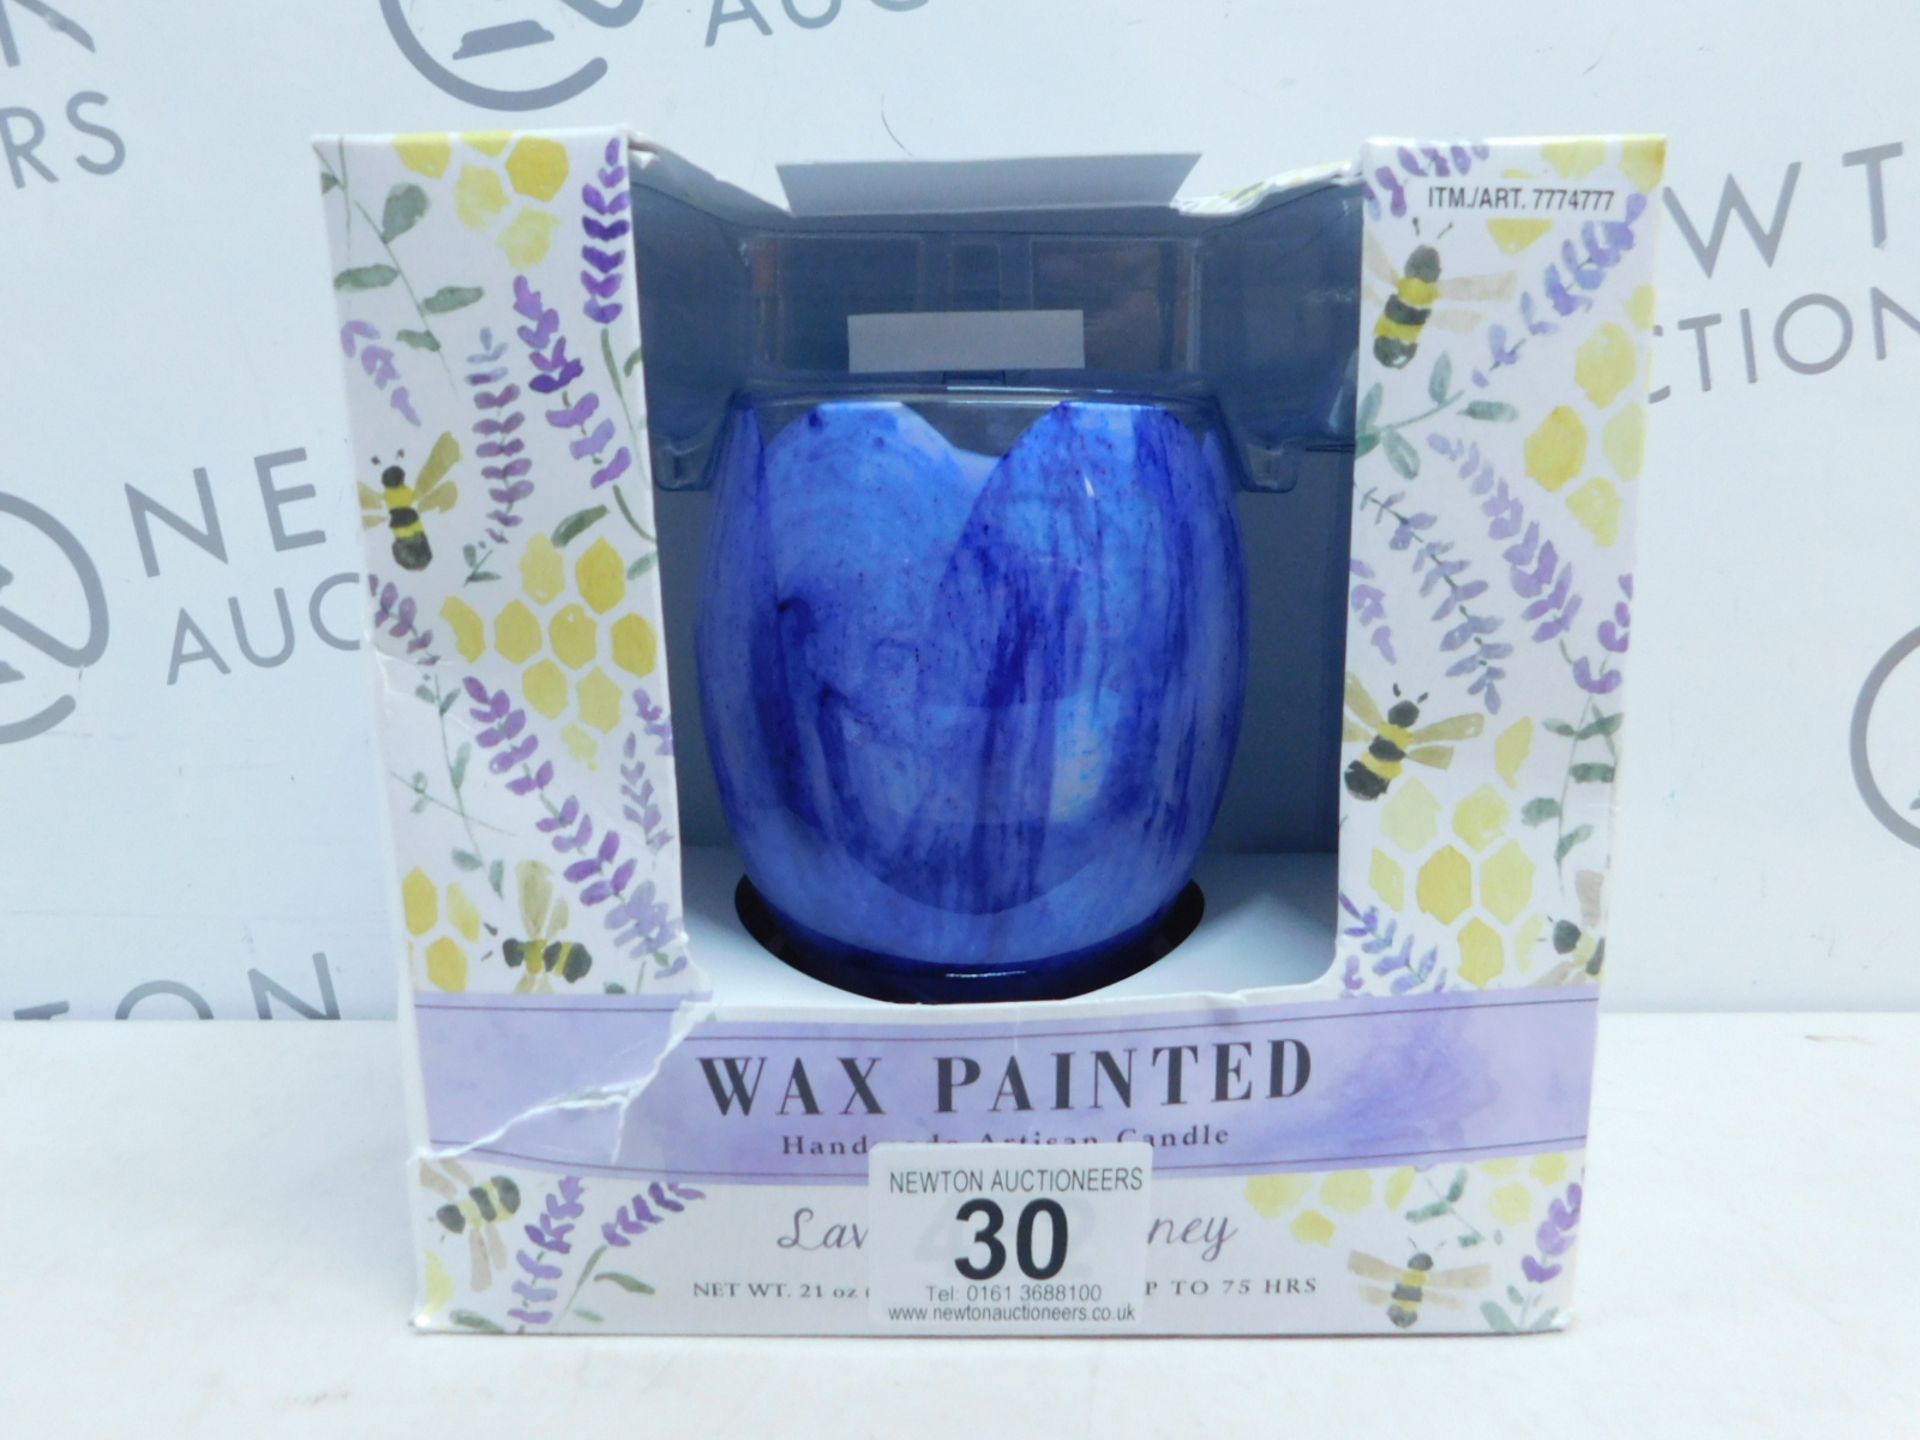 1 BOXED WAX PAINTED HANDMADE ARTISAN CANDLE IN LAVENDER AND HONEY RRP £29.99